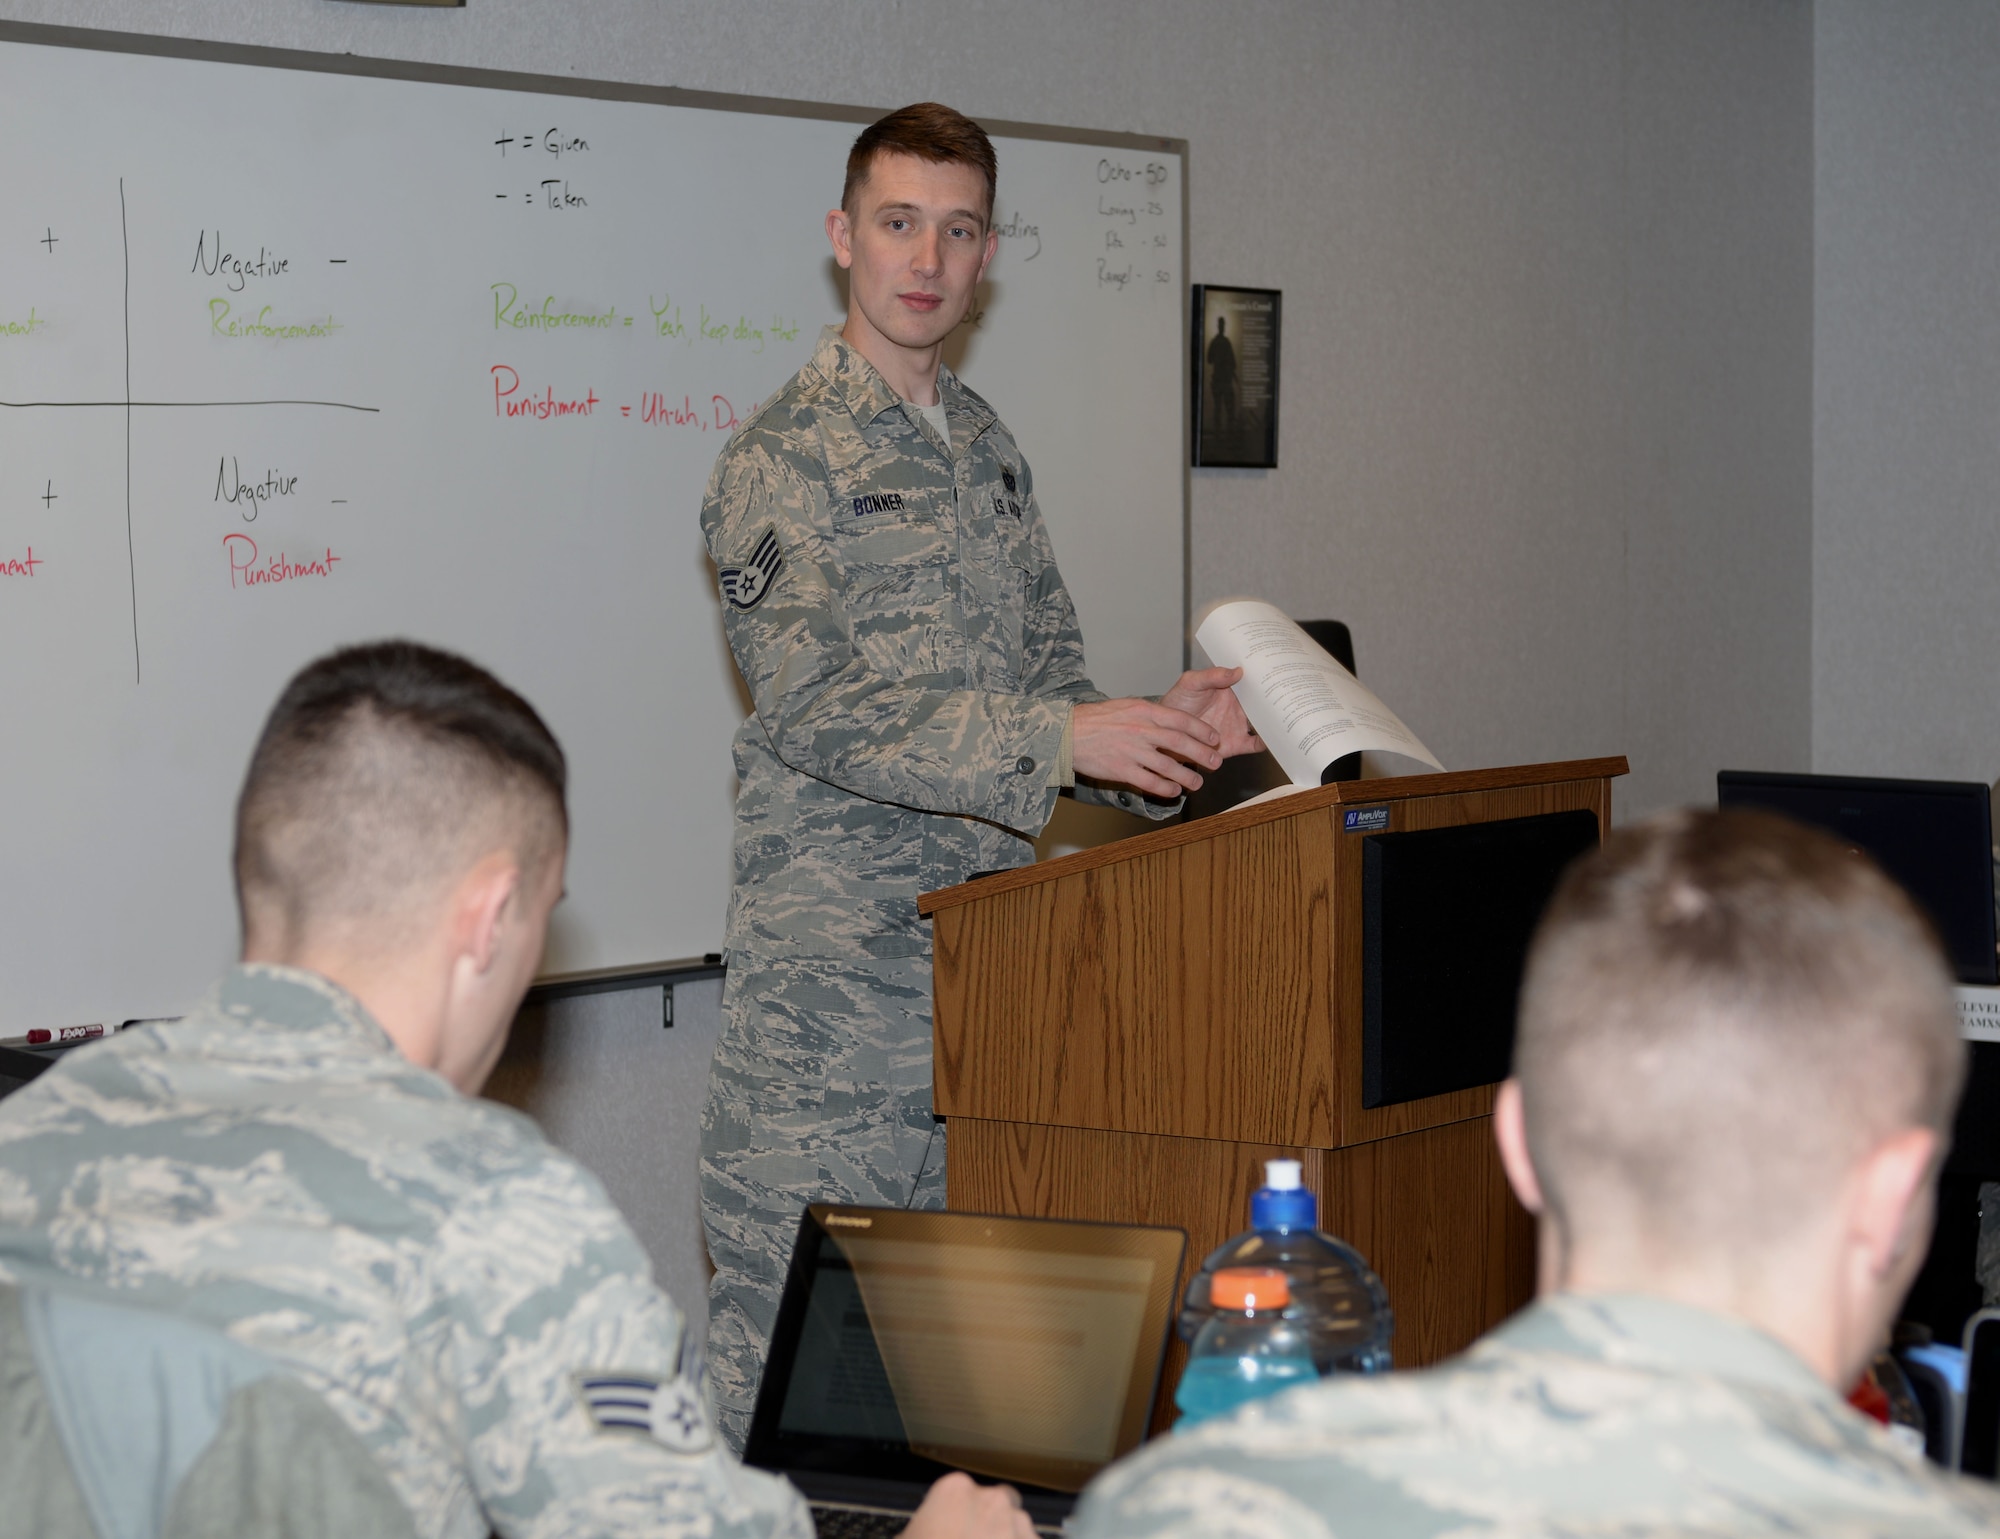 Staff Sgt. Aaron Bonner, 28th Force Support Squadron Airman Leadership School instructor, teaches his class about punishments and reinforcements at Ellsworth Air Force Base, S.D., Feb. 25, 2016. During their time at ALS, Airmen learn useful leadership and life skills to help them become effective supervisors. (U.S. Air Force photo by Airman 1st Class Denise M. Nevins/Released)